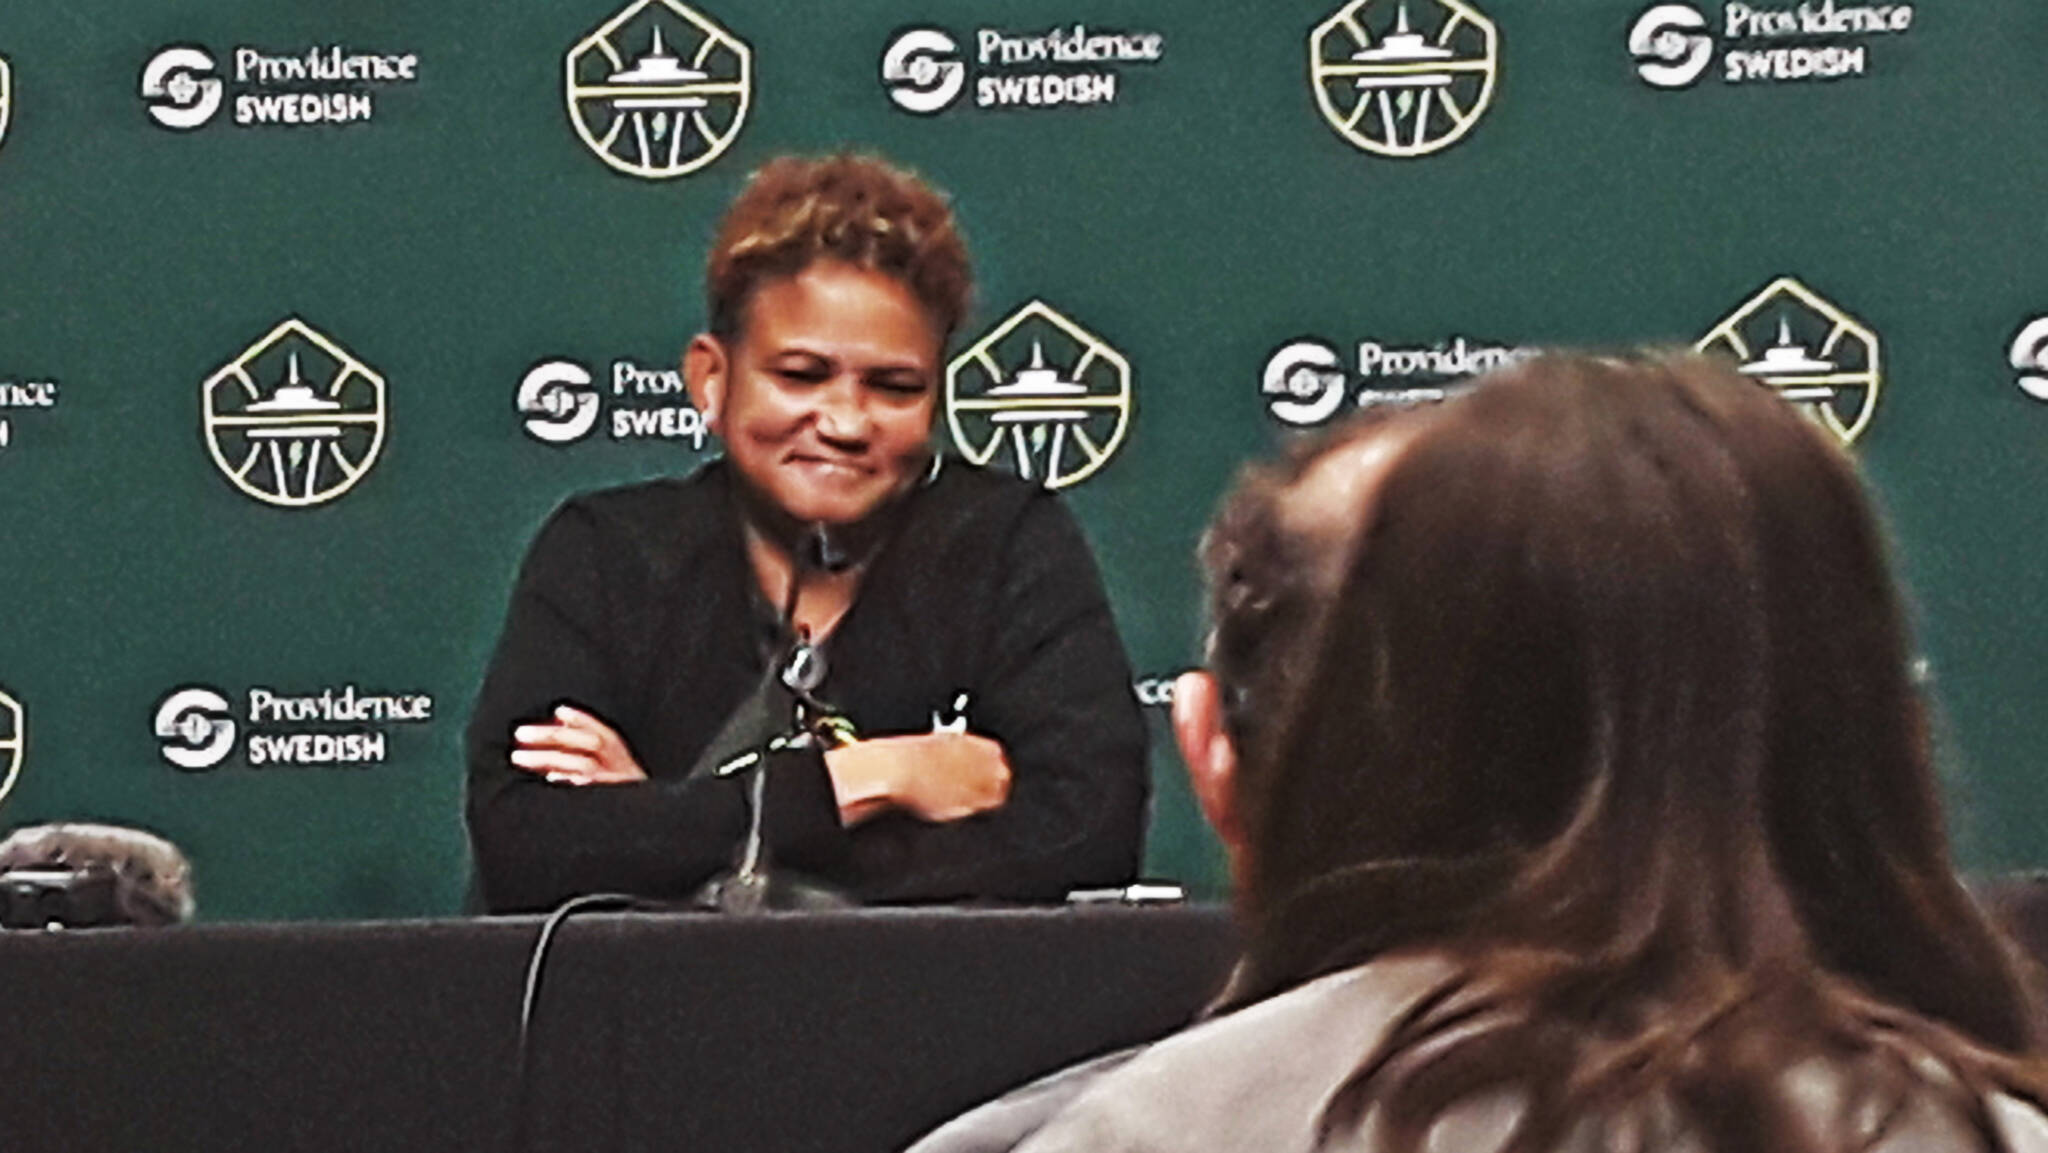 Pokey Chatman can't imagine what the WNBA will be like without Sue Bird playing.